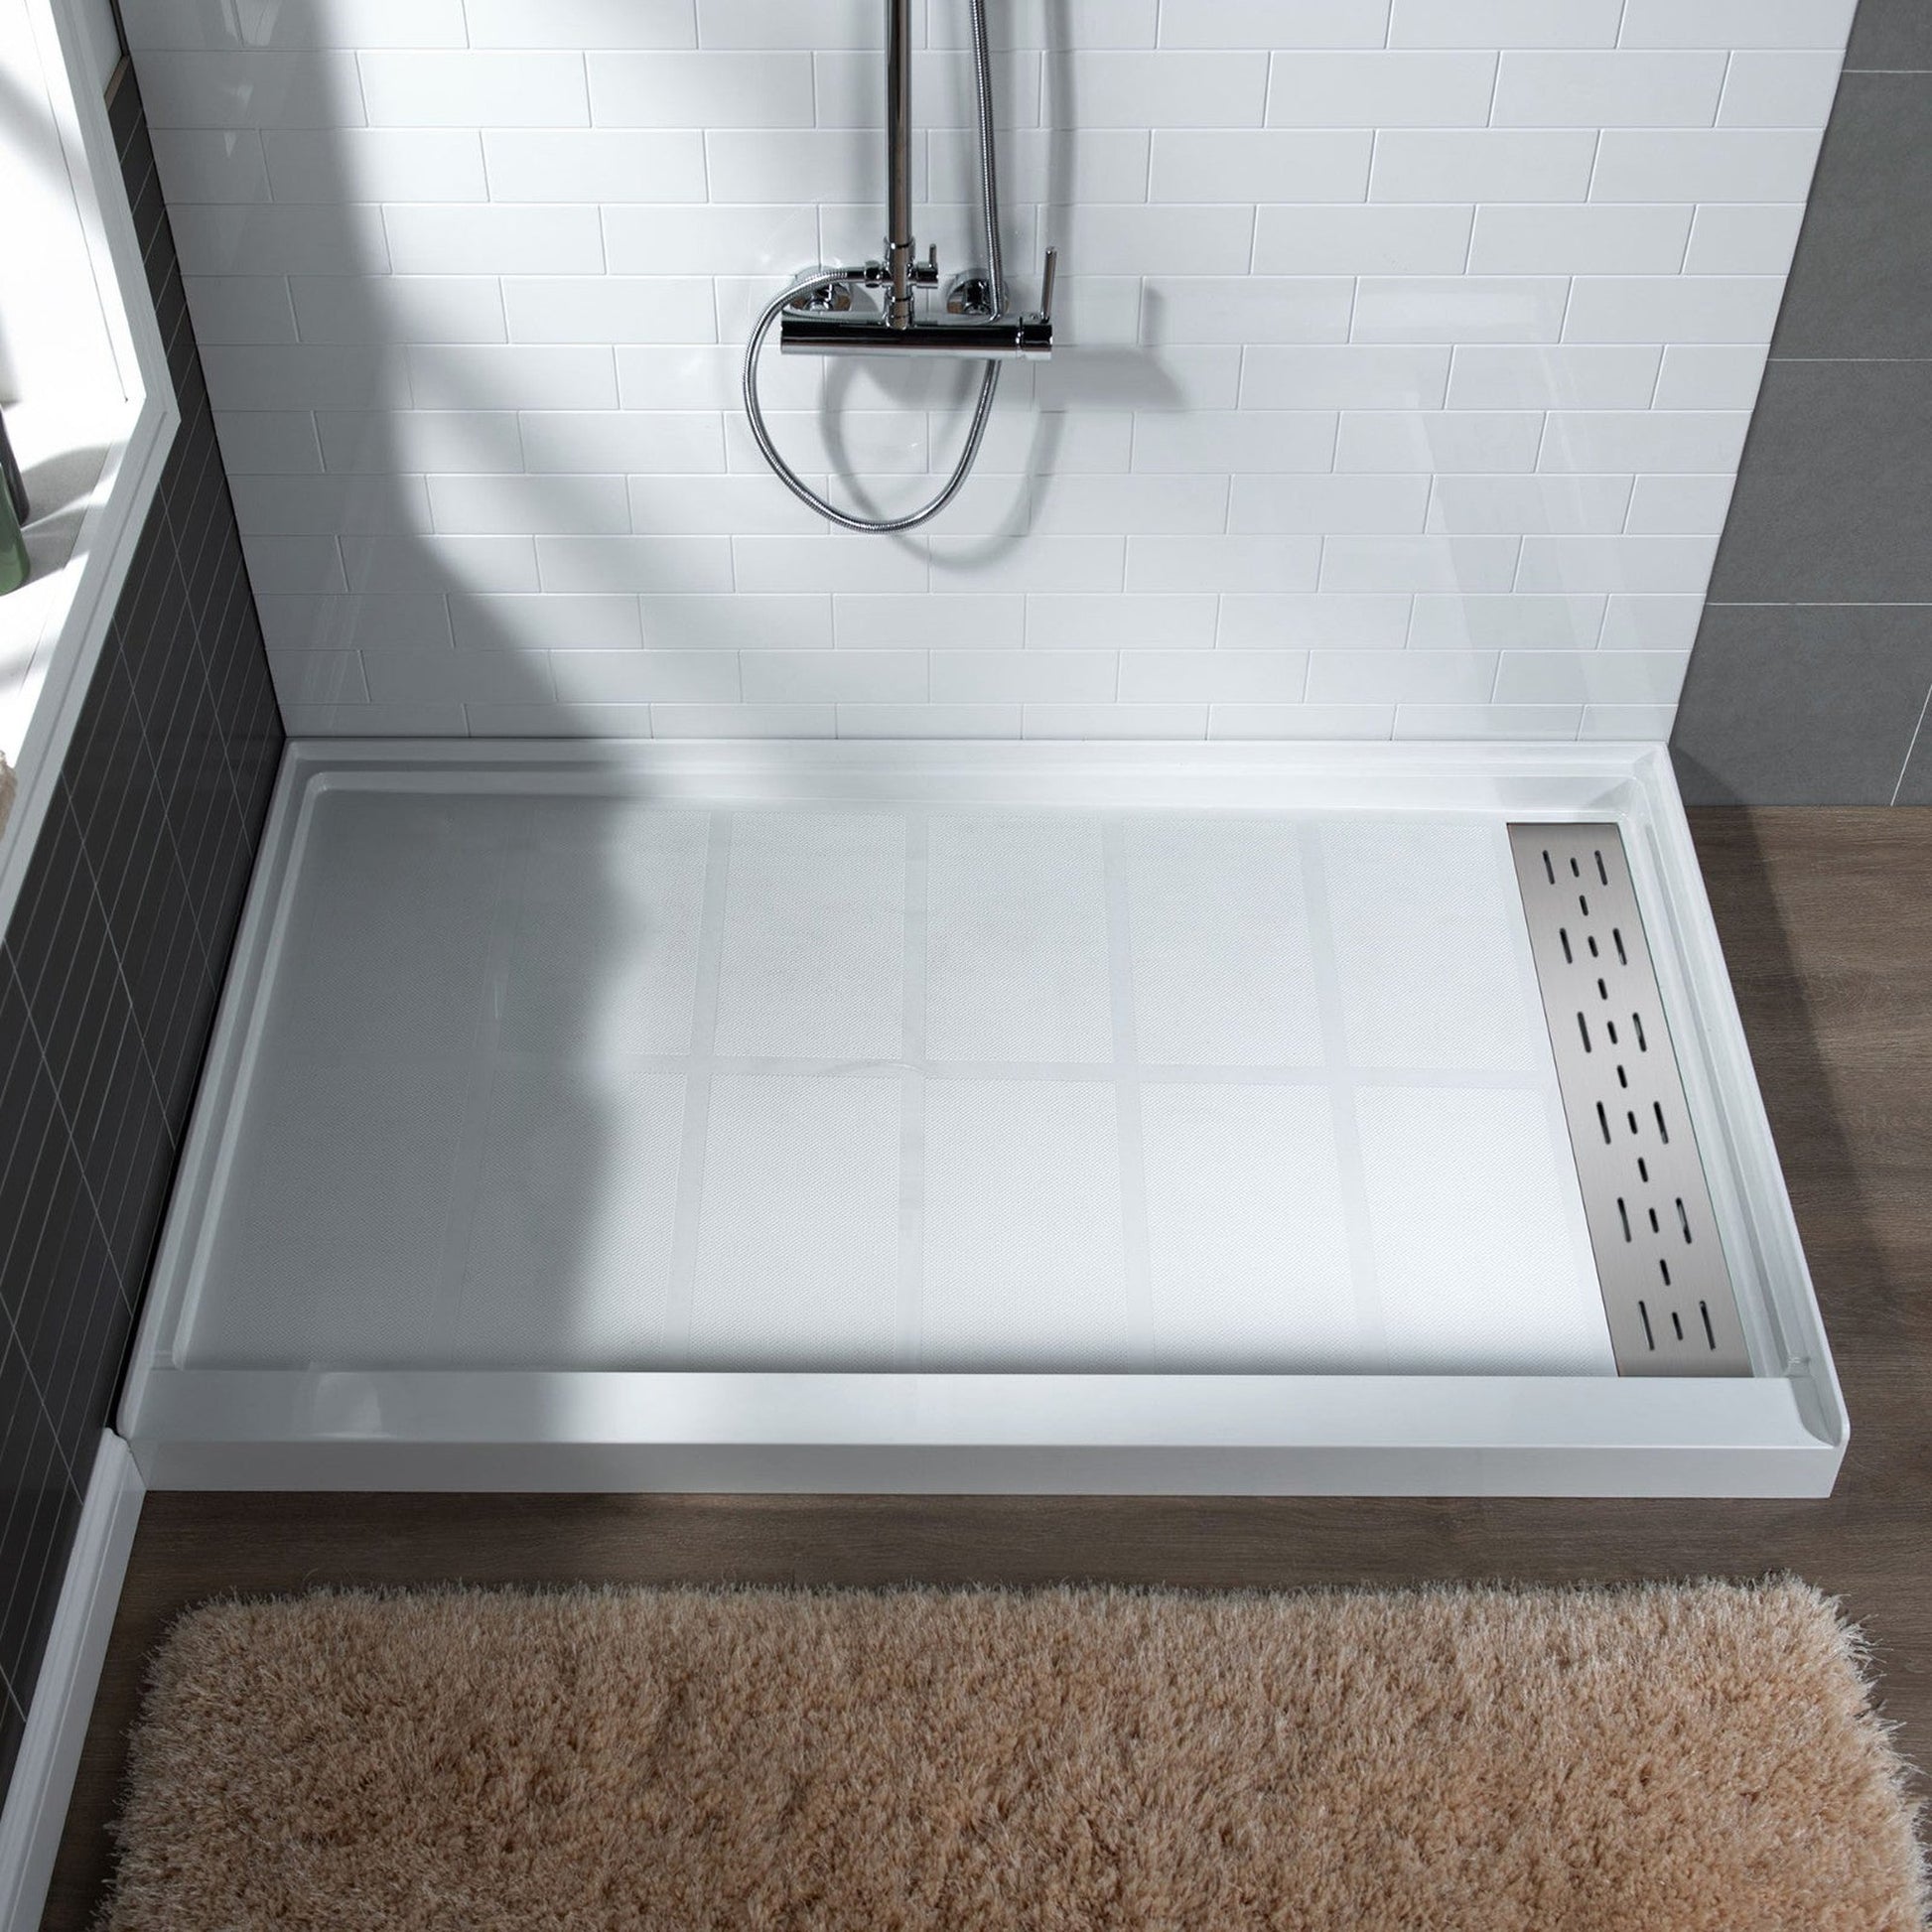 WoodBridge 60" x 36" White Solid Surface Shower Base Right Drain Location With Brushed Nickel Trench Drain Cover